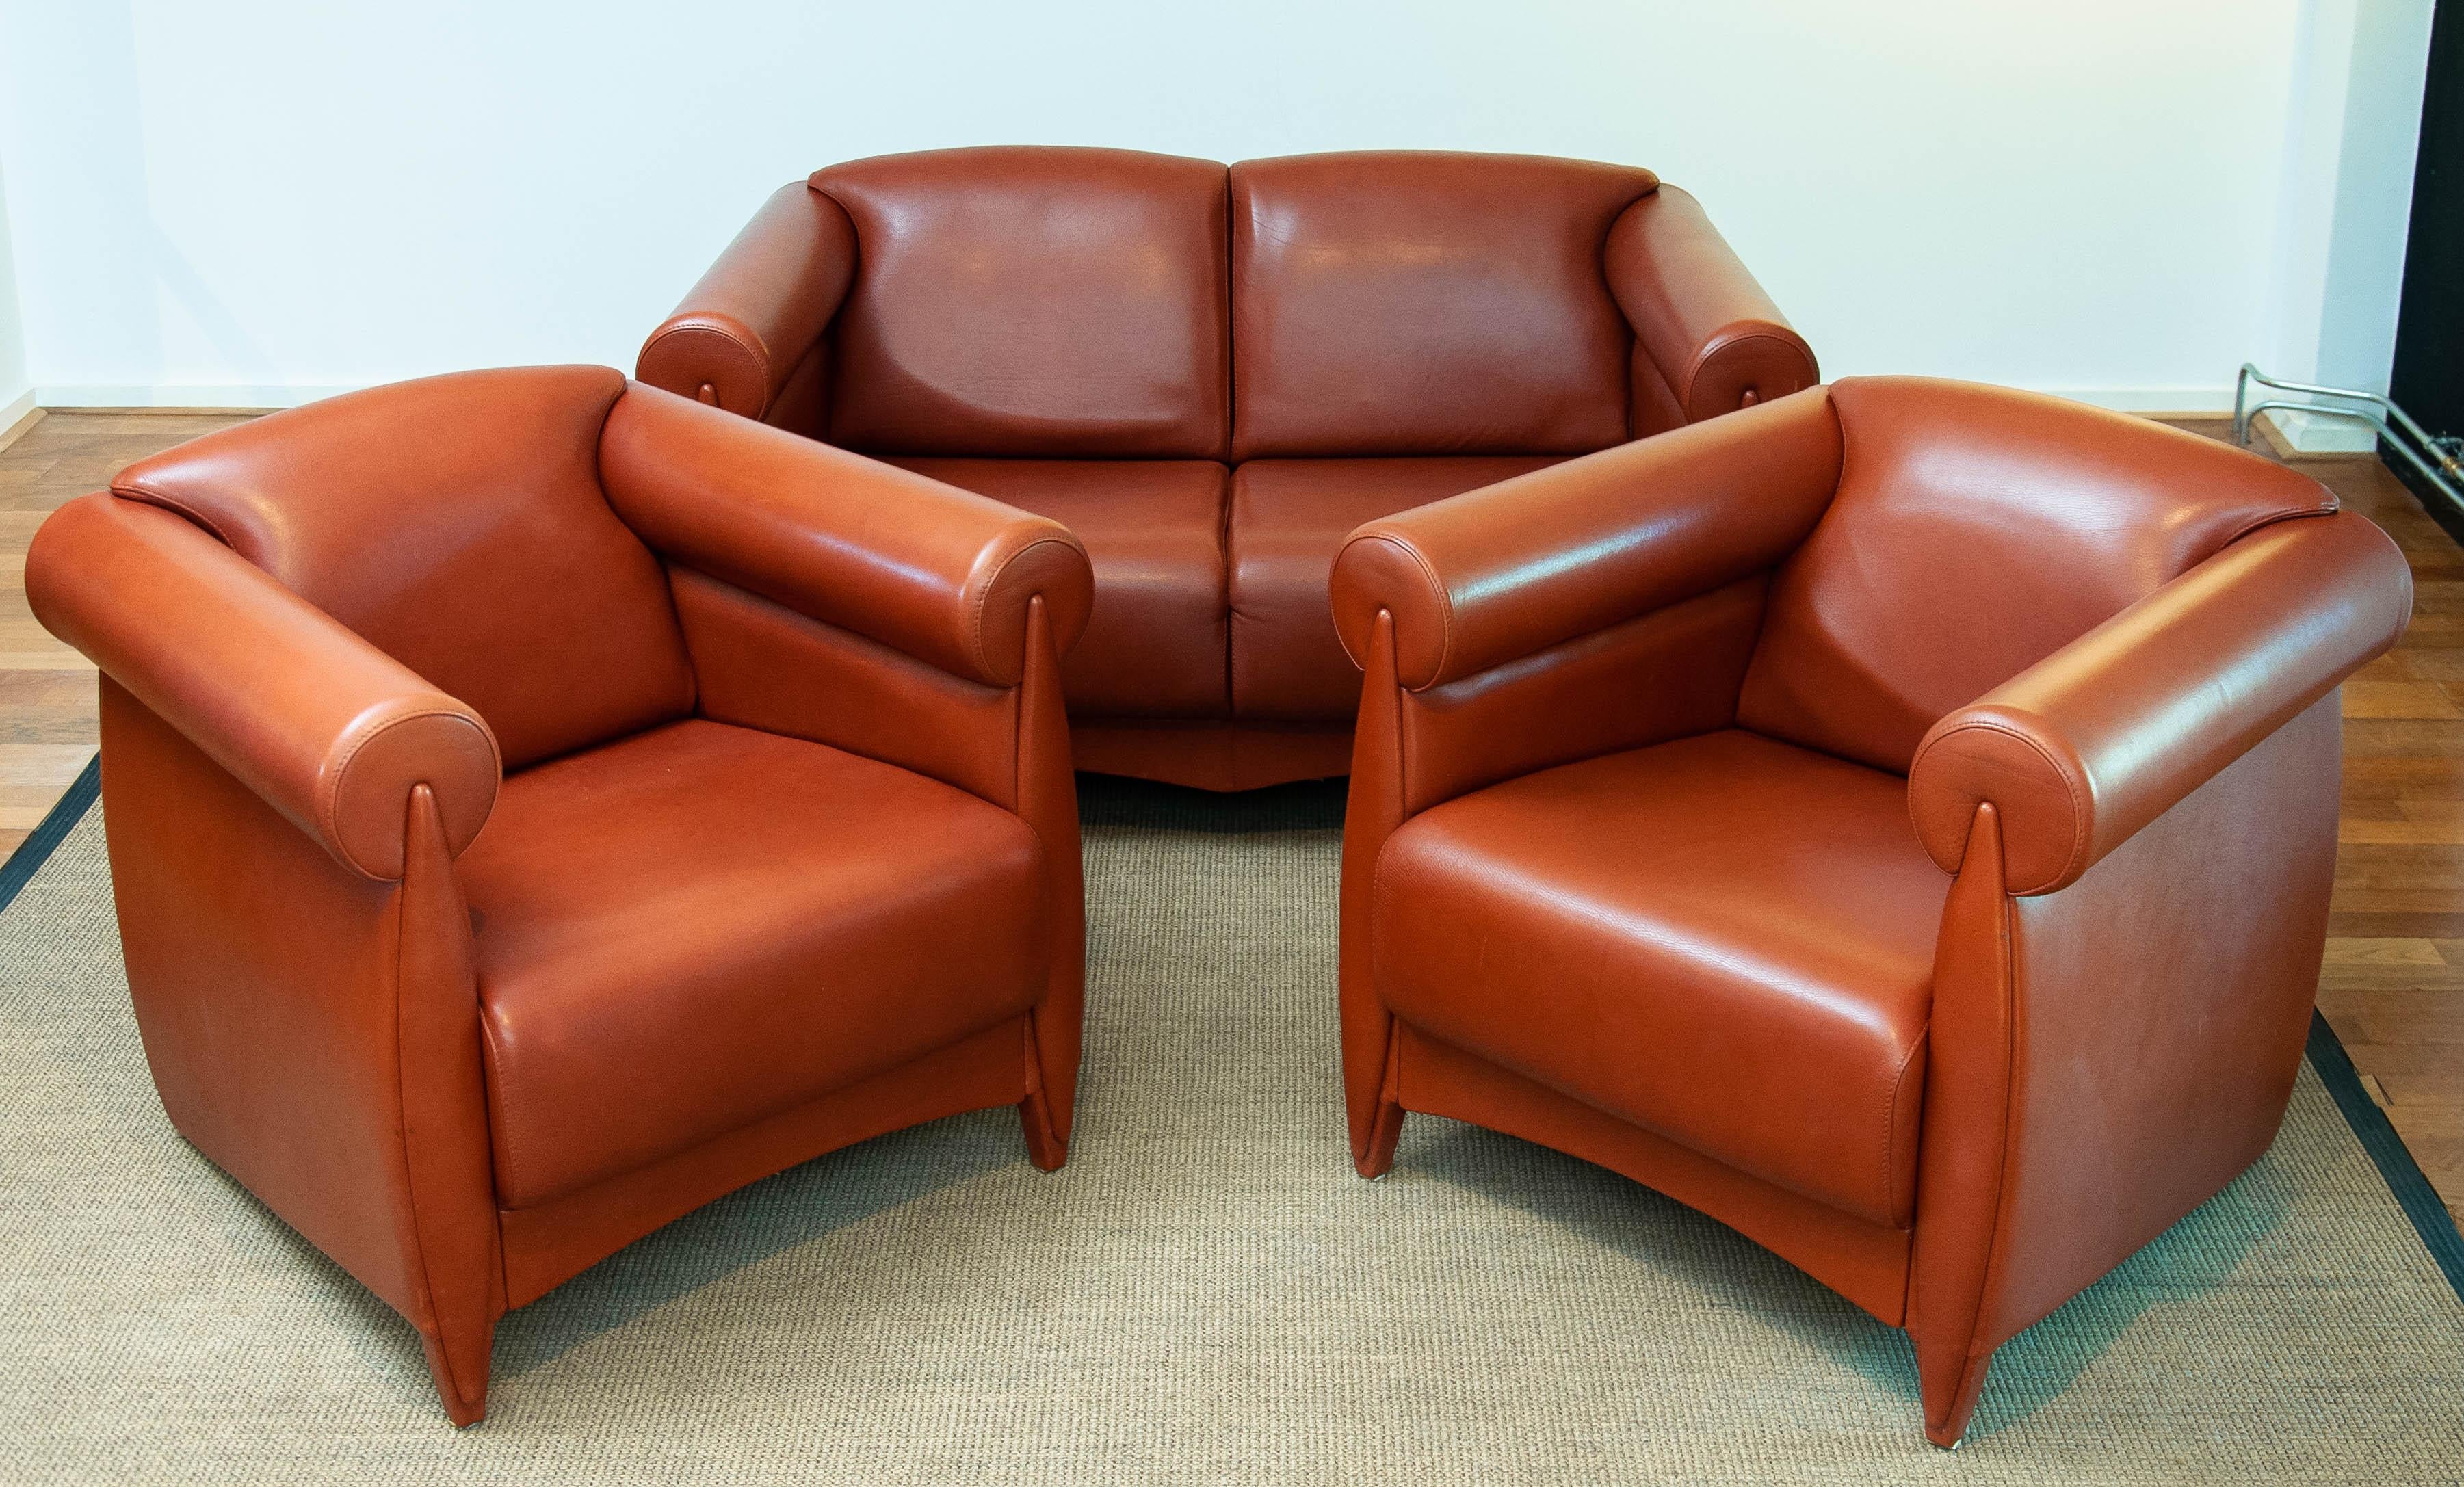 '80 Modern Art Deco Seating Group in Cognac Leather by Klaus Wettergren Denmark  For Sale 2